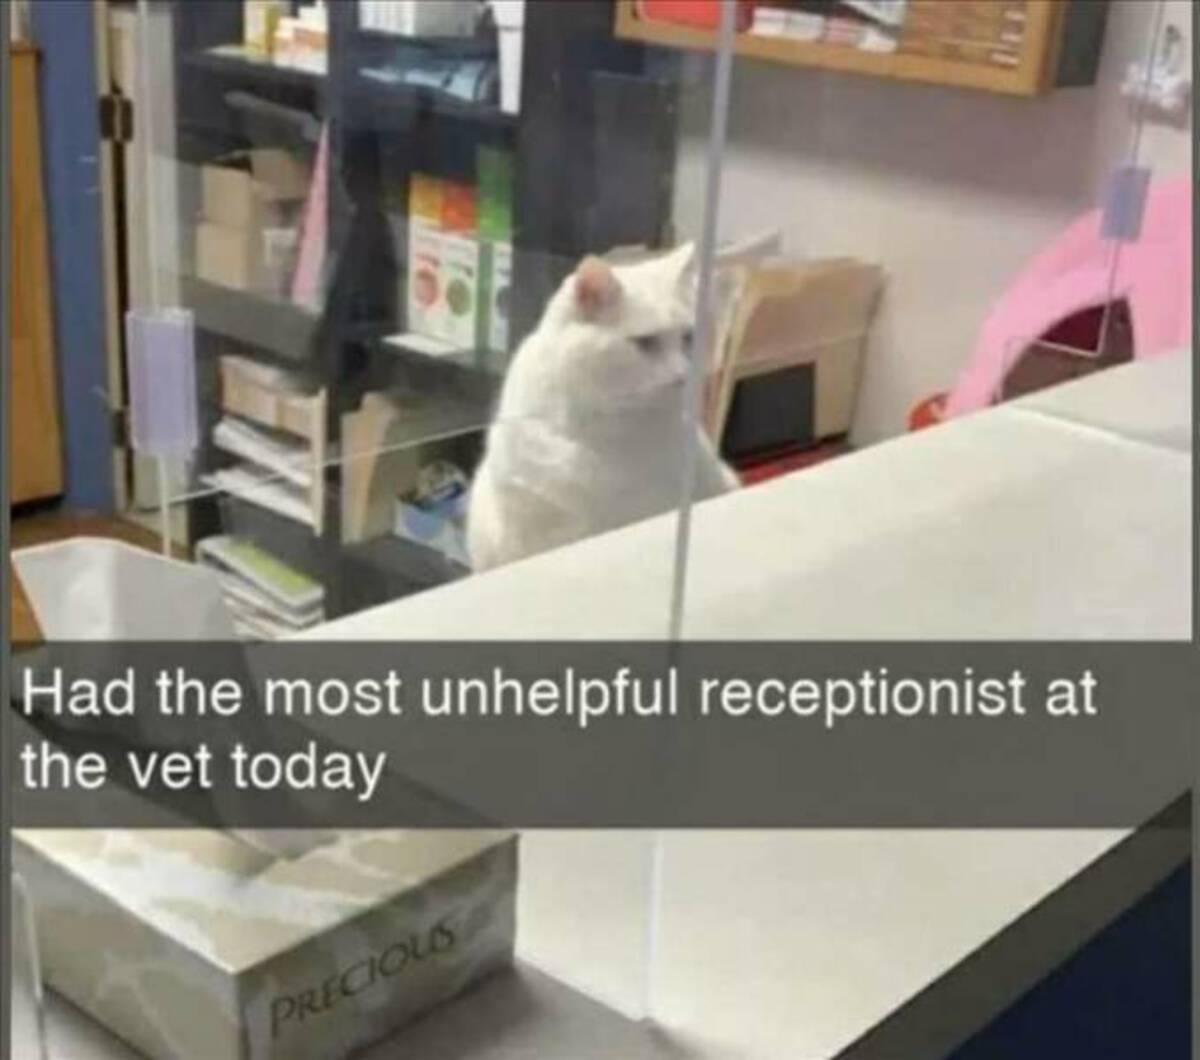 vet reception meme - Had the most unhelpful receptionist at the vet today Precious